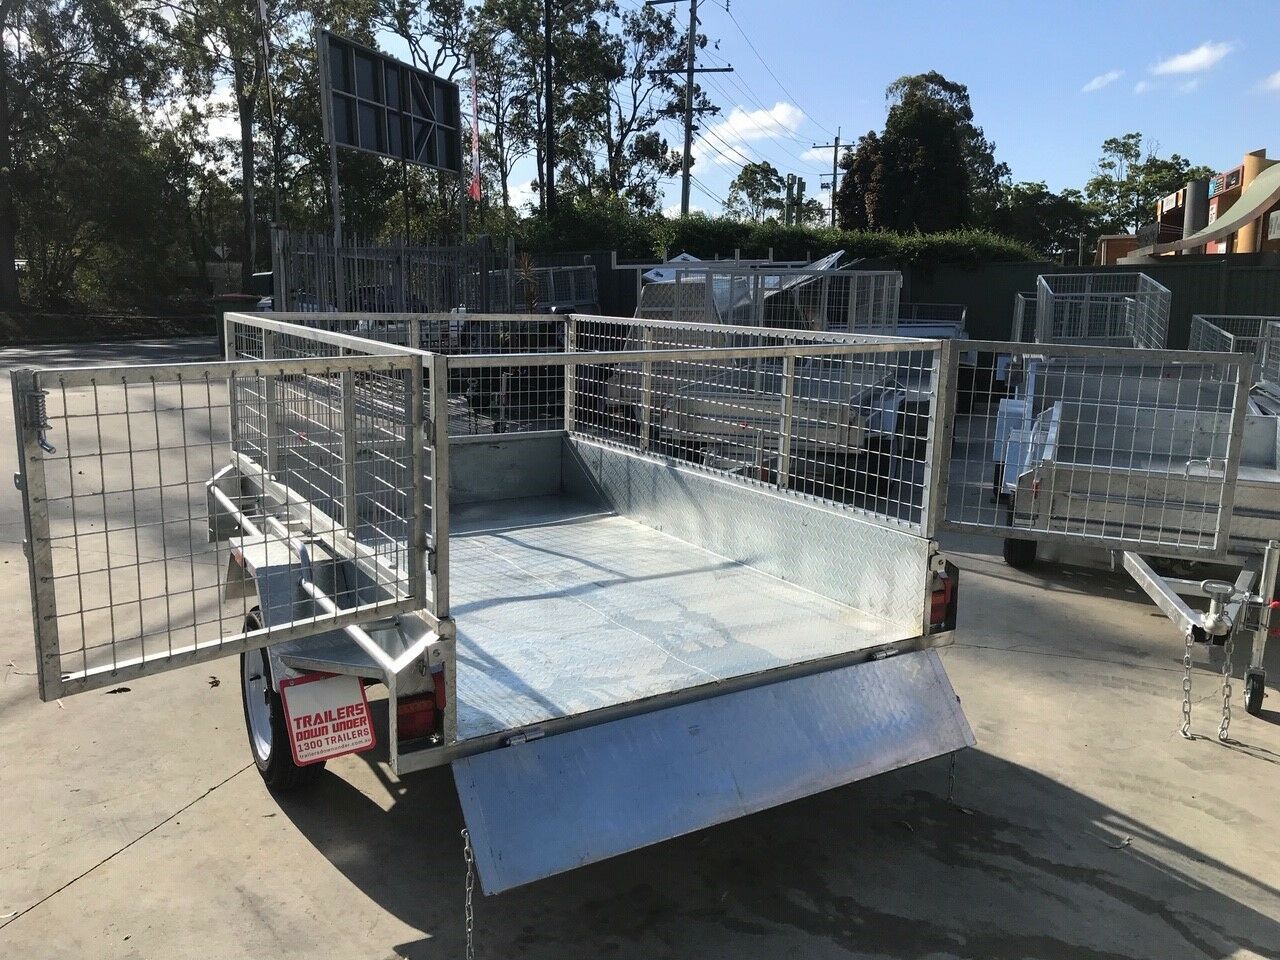 8×5 Galvanised 3ft Cage Trailer with Full Checker Plate and Tilt Function for Sale Brisbane<br><br><span class="galv-import">Imported Trailer</span>